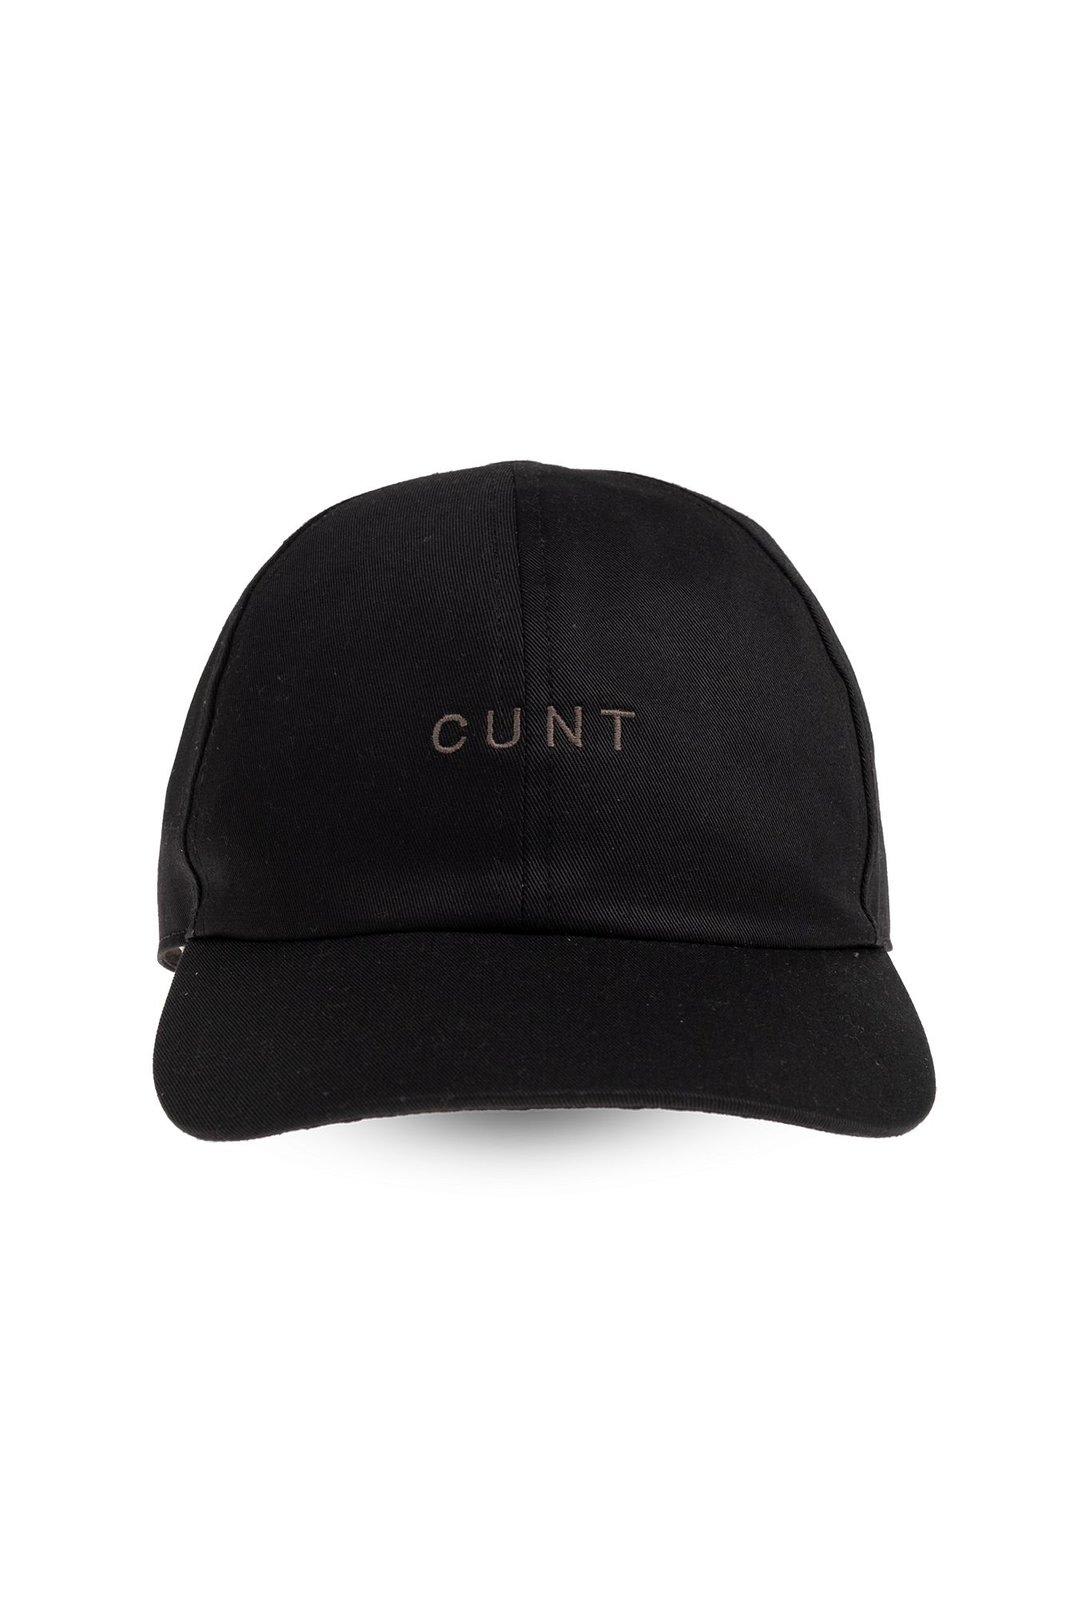 Text-embroidered Curved Peak Baseball Cap